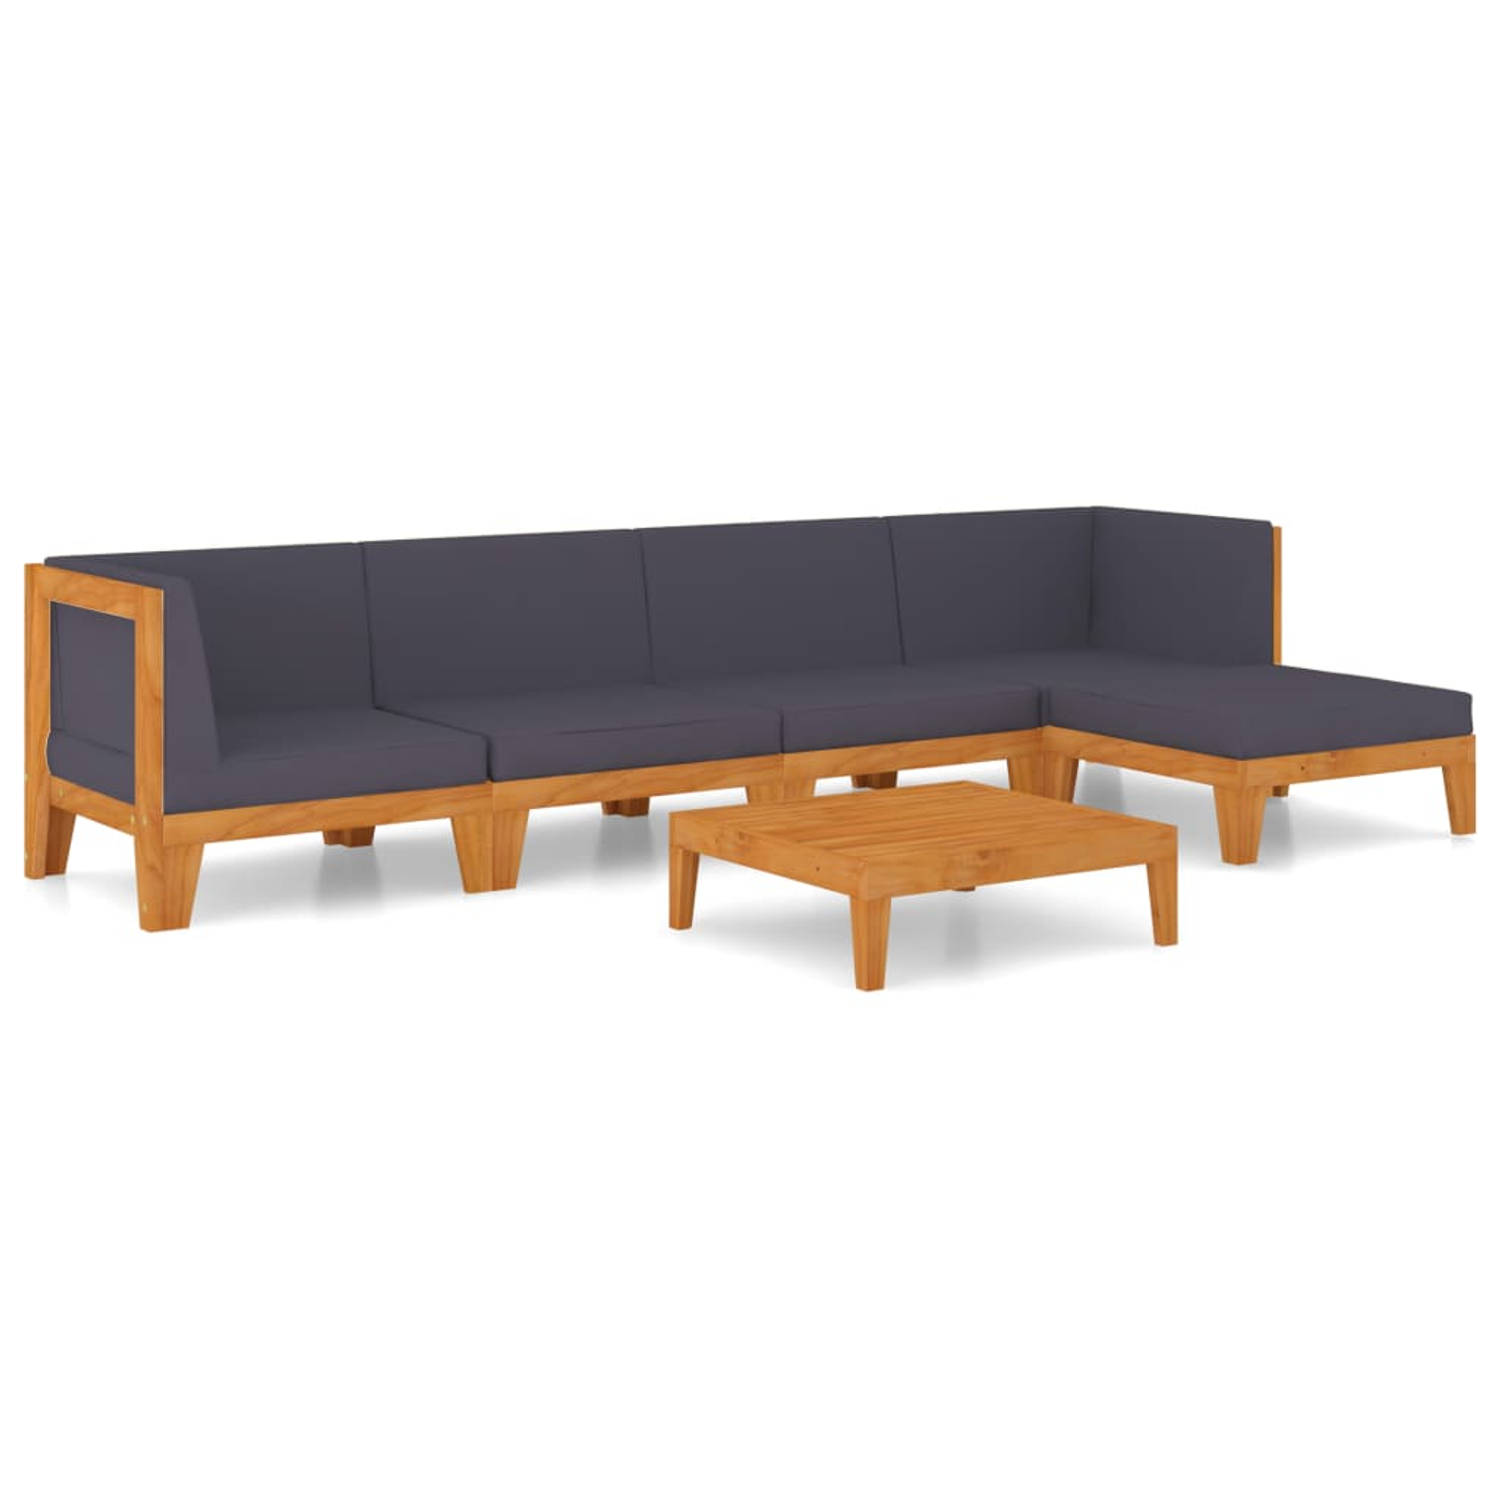 The Living Store 6-delige Loungeset met kussens massief acaciahout - Tuinset